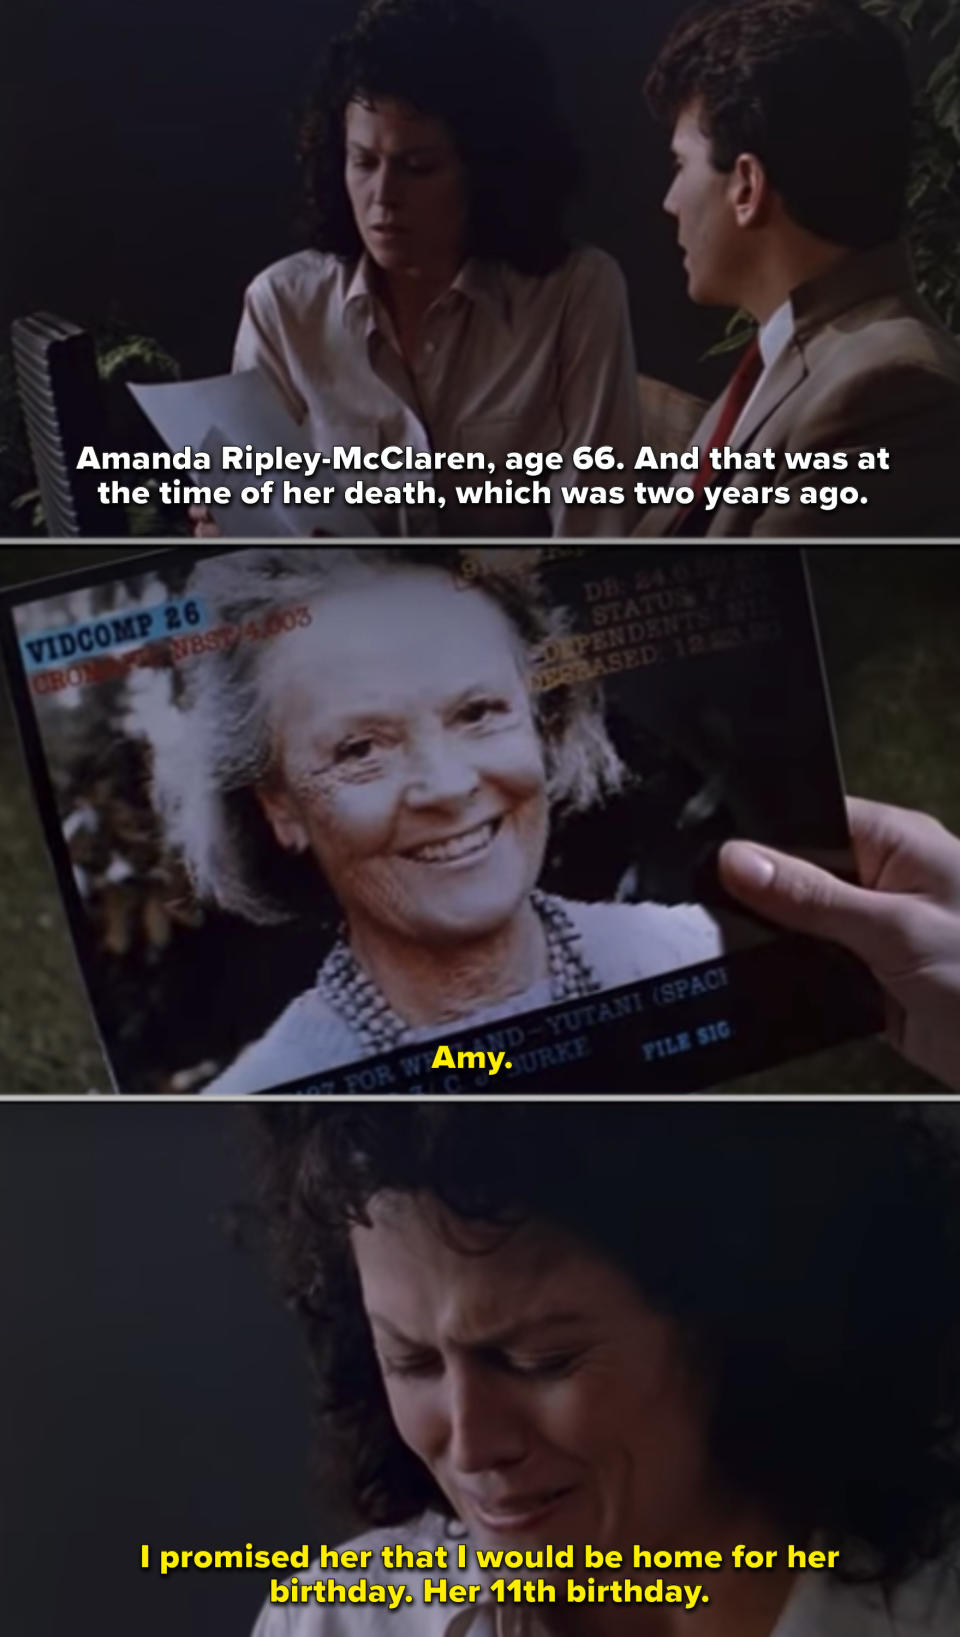 Ripley looking at a picture of her daughter as an old woman